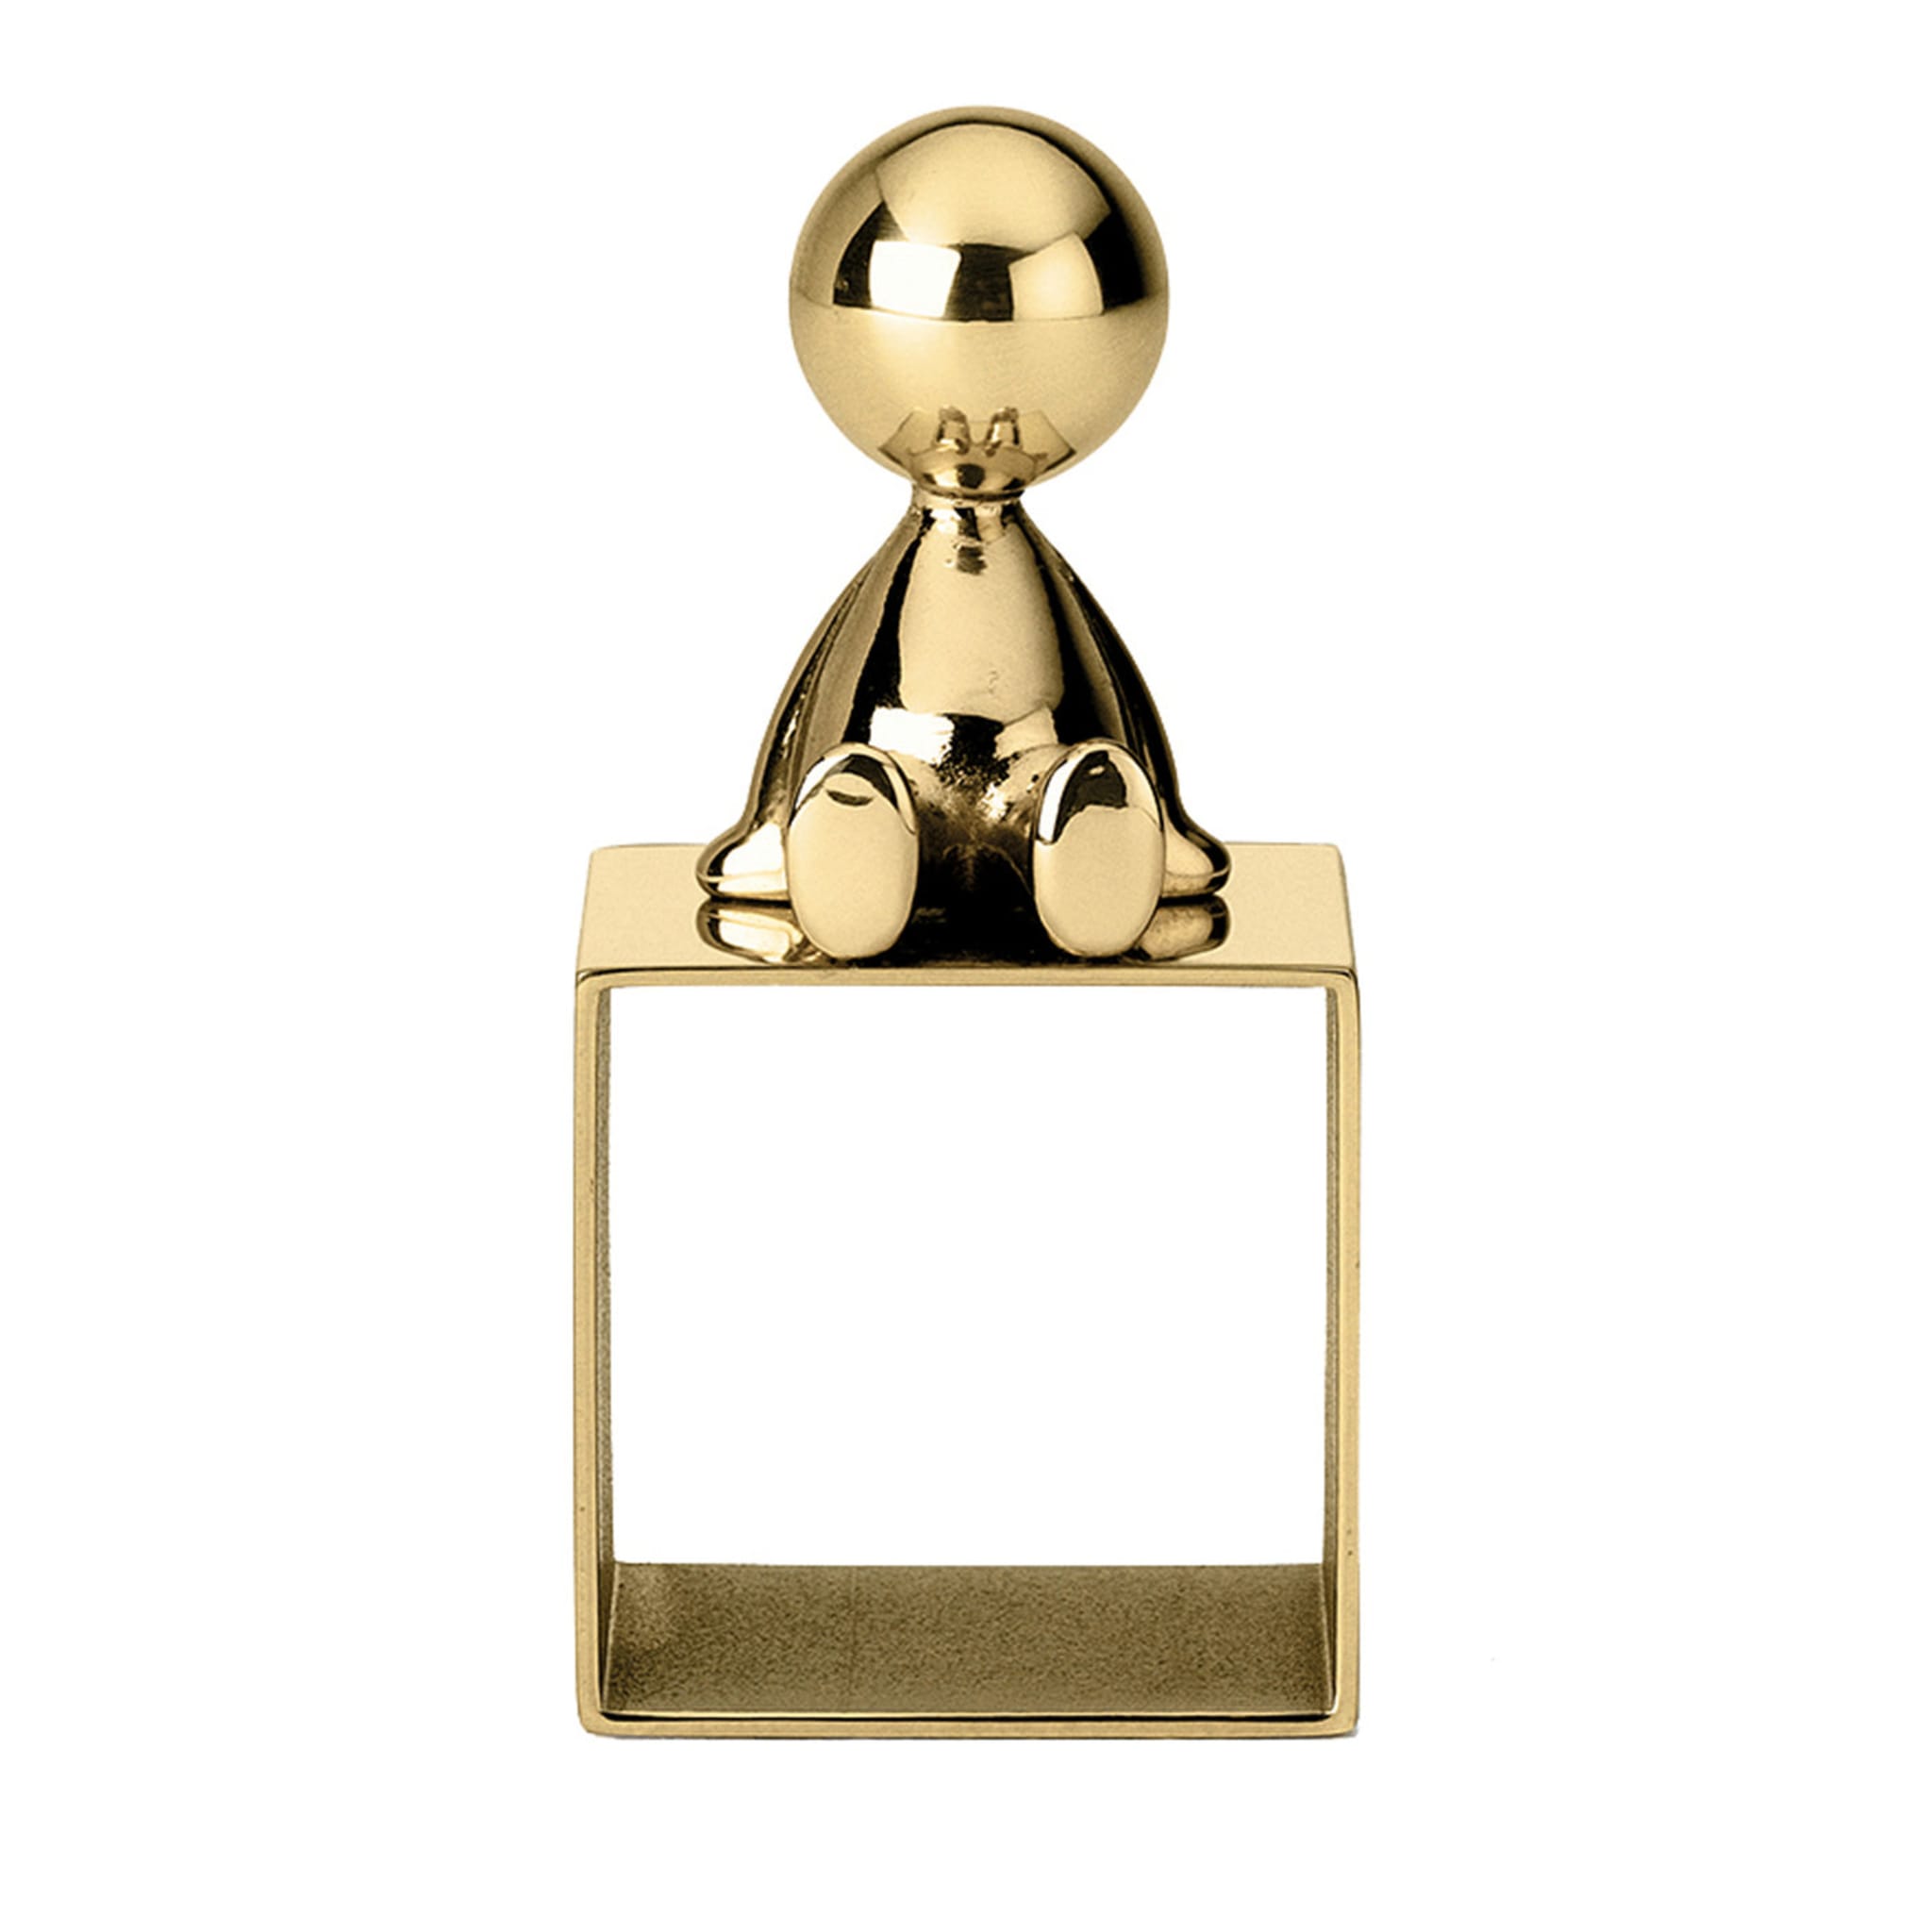 Omini Top Napkin Ring in Polished Brass By Stefano Giovannoni - Main view